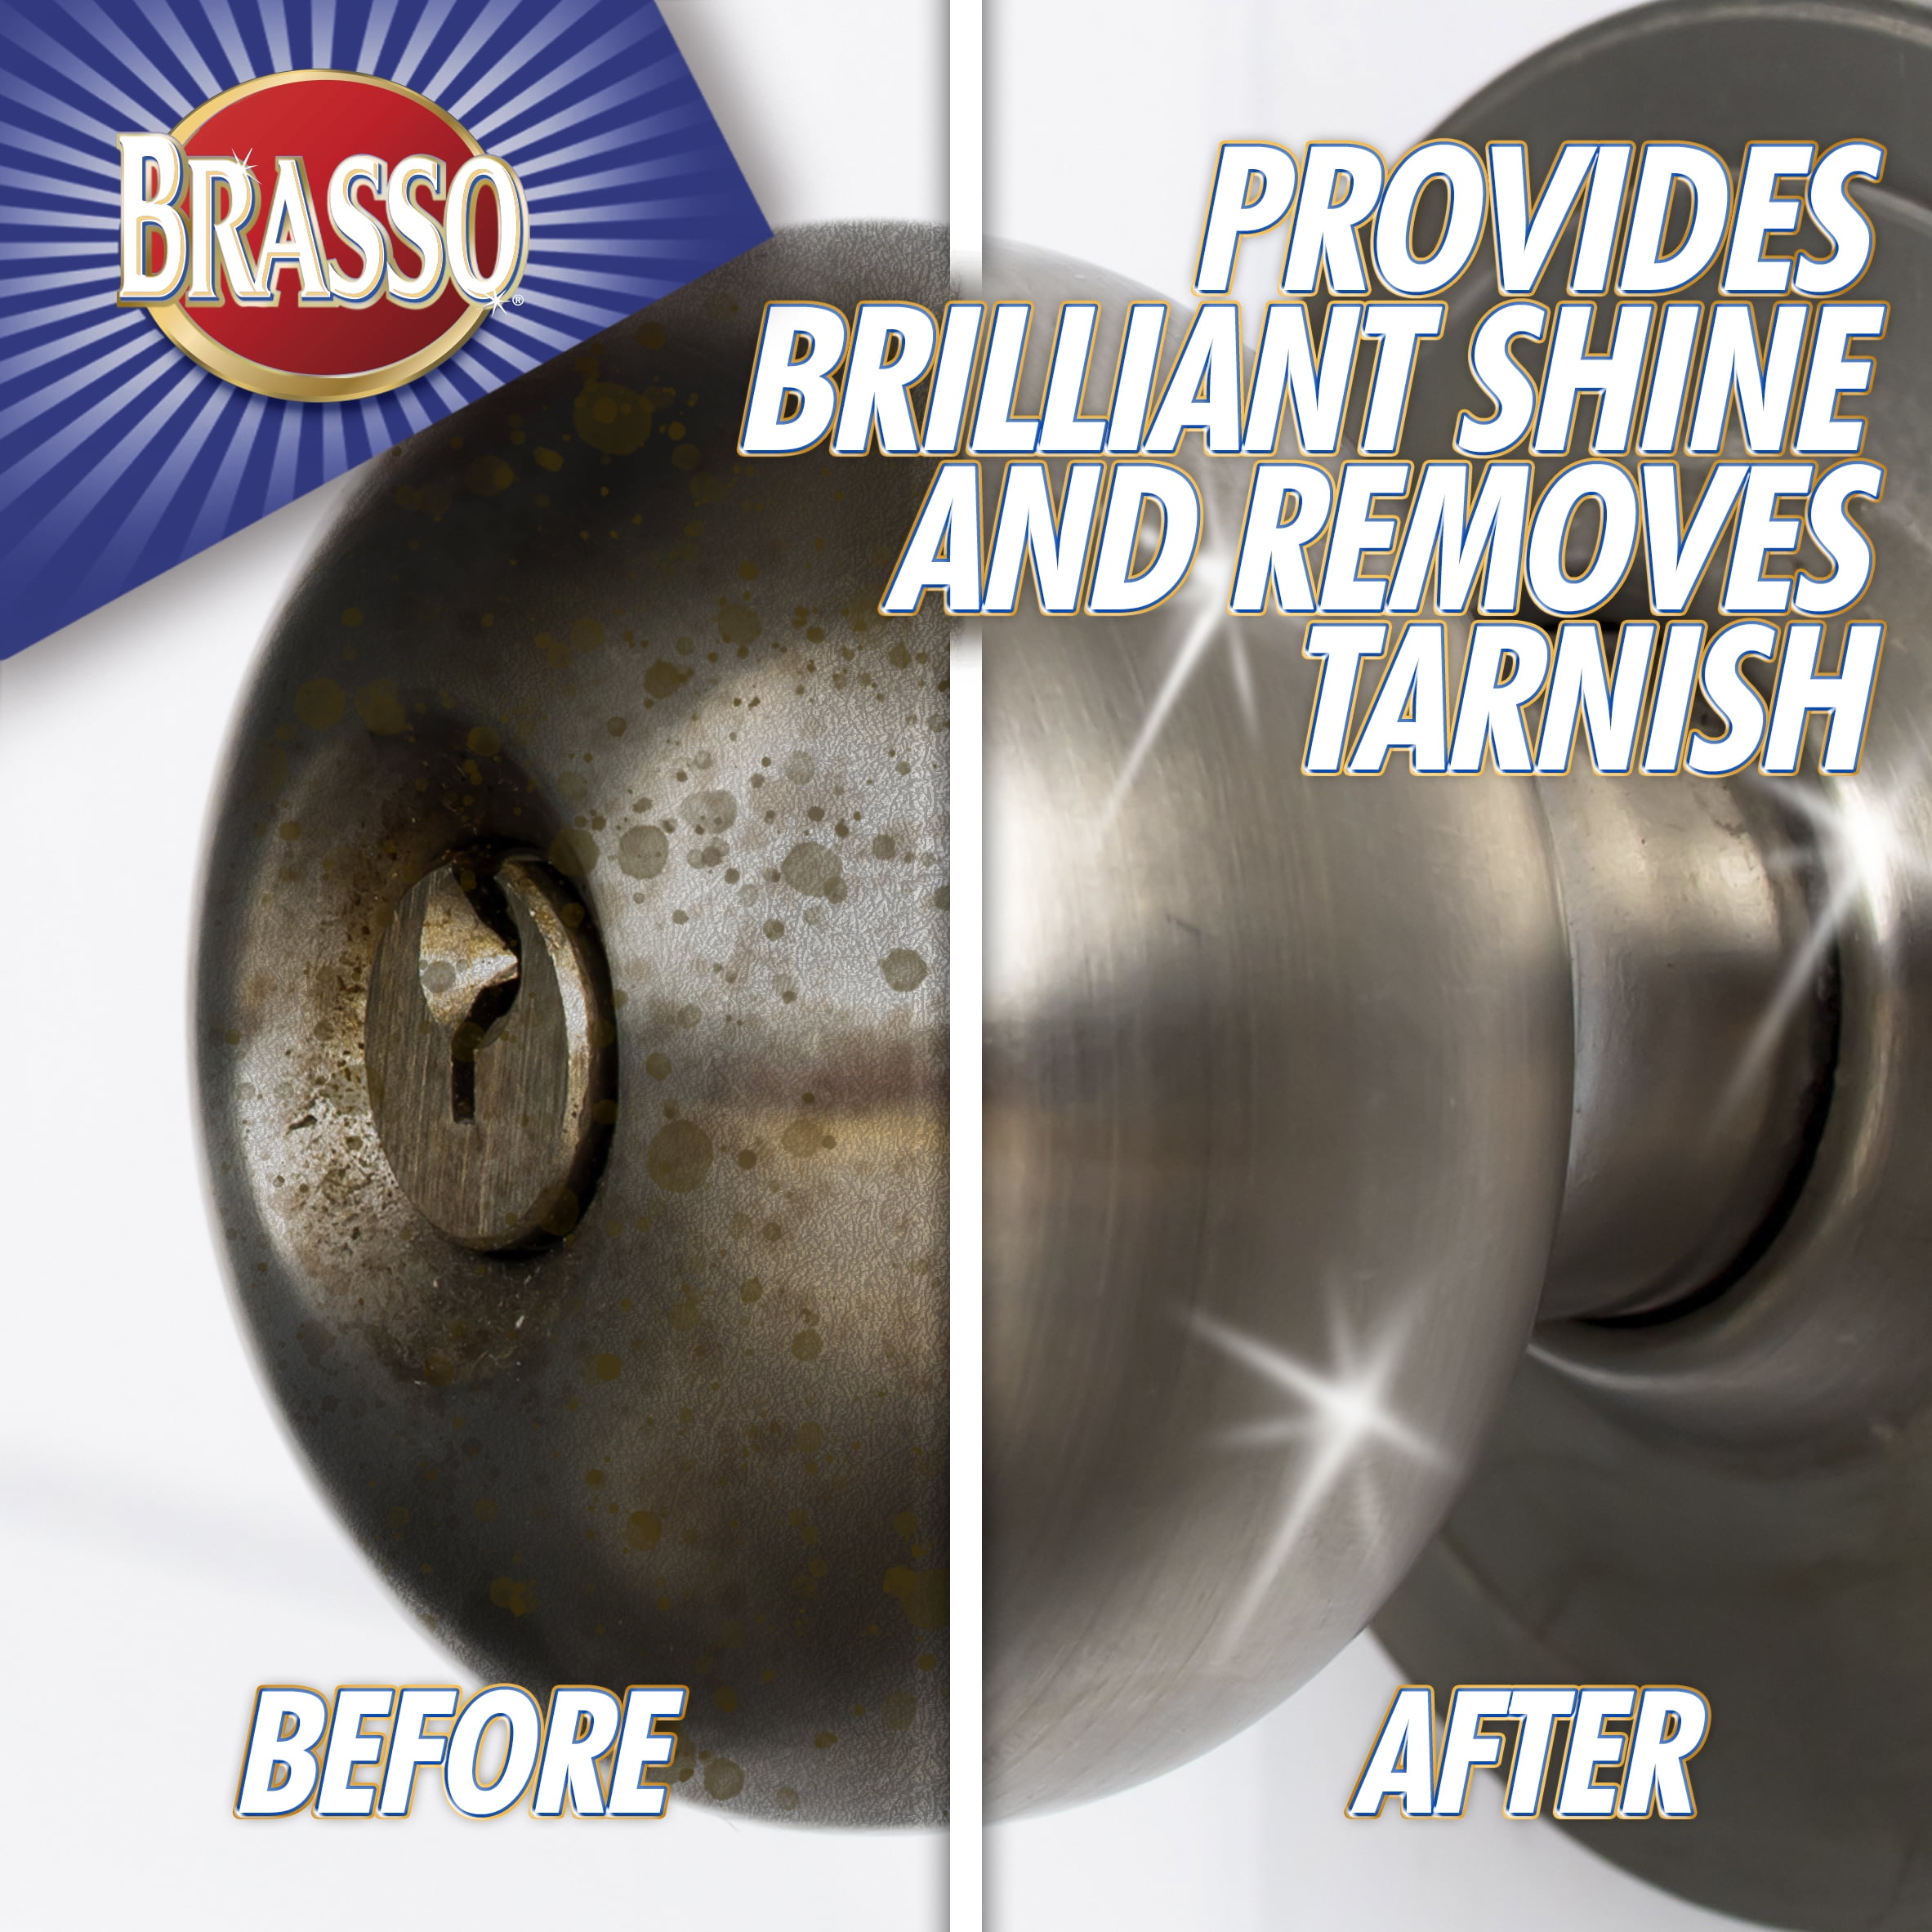 BRASSO Metal Polish Cleaner Creamy Lotion for BRASS Copper Stainless Chrome  Aluminum Pewter Bronze Metals 76523 -  Israel